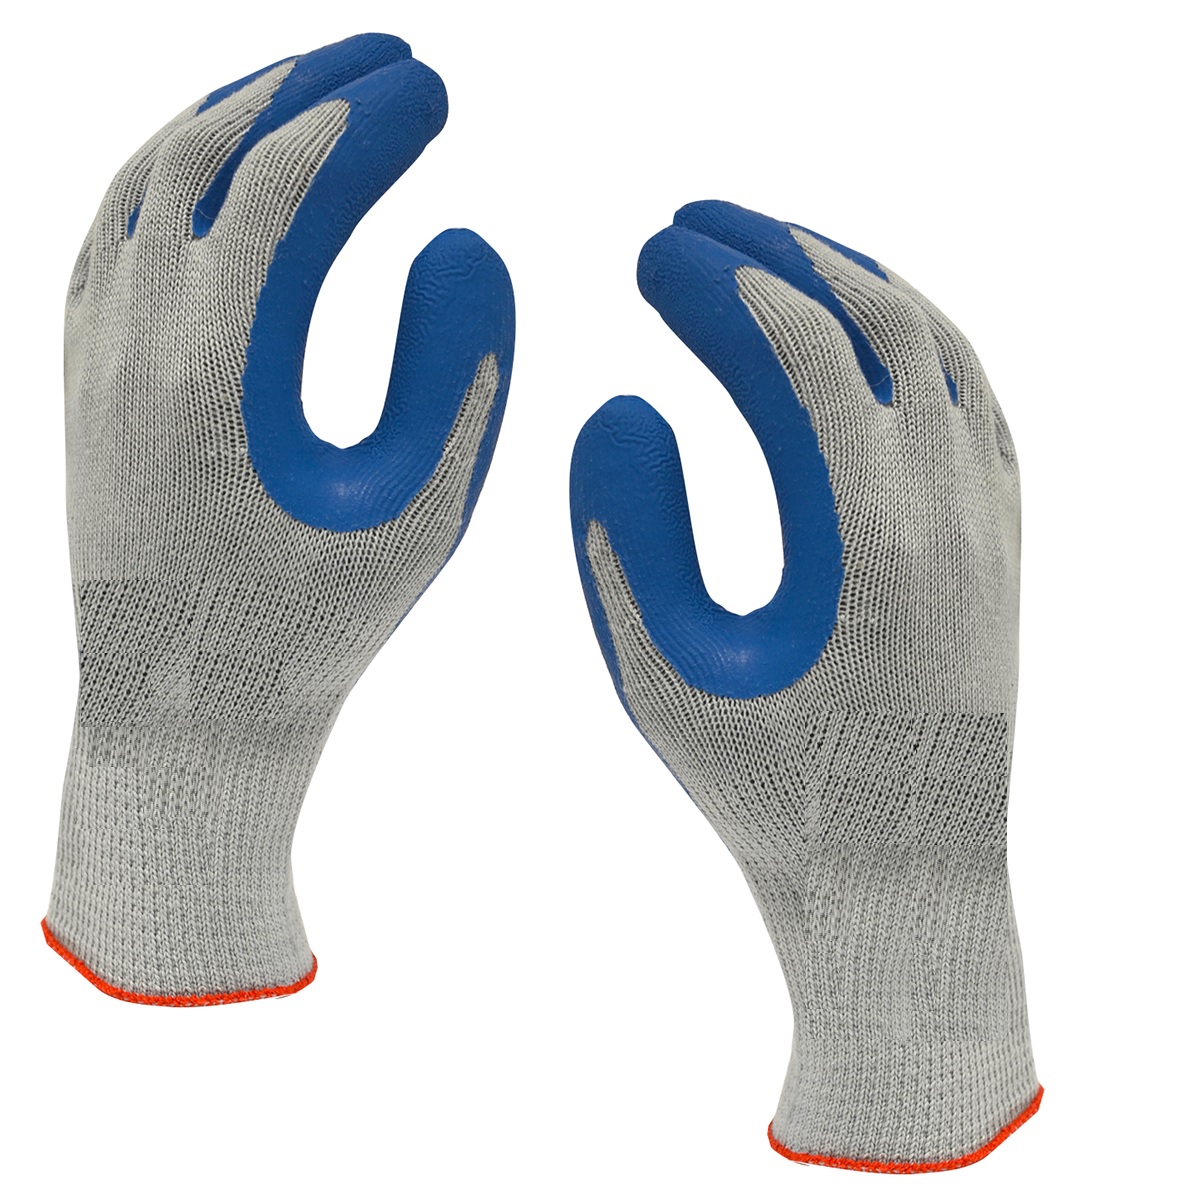 https://www.fishermansoutfitter.com/wp-content/uploads/2014/09/Rubber-Coated-Cotton-Gloves.jpg